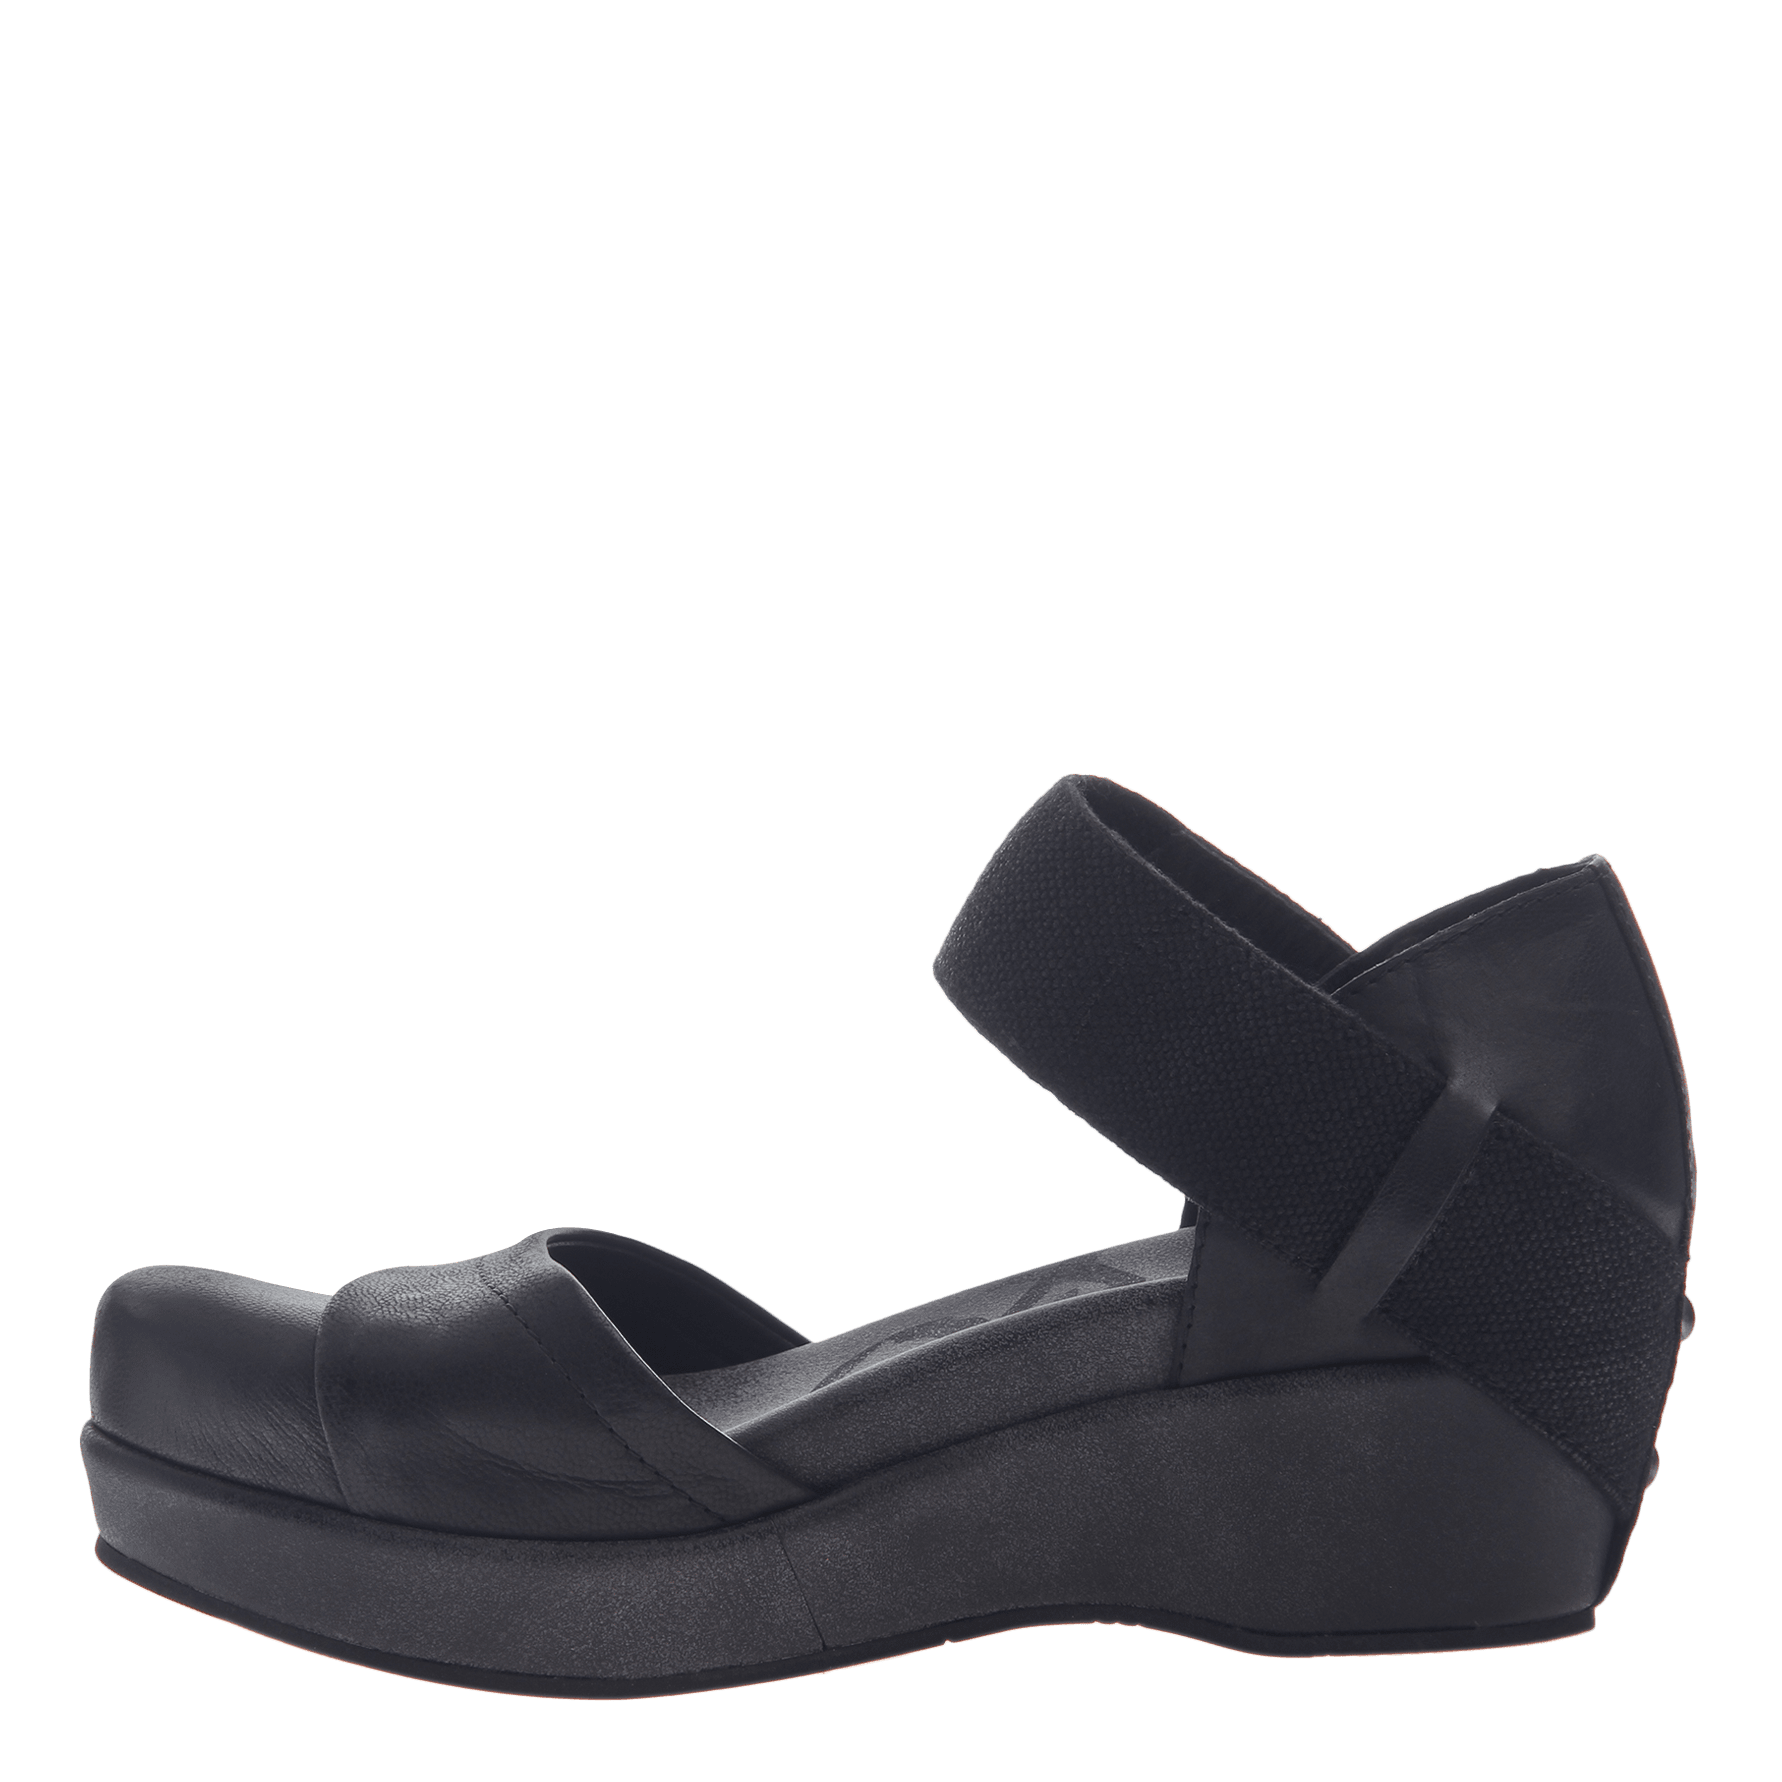 Wander Out in Black Closed Toe Wedges 